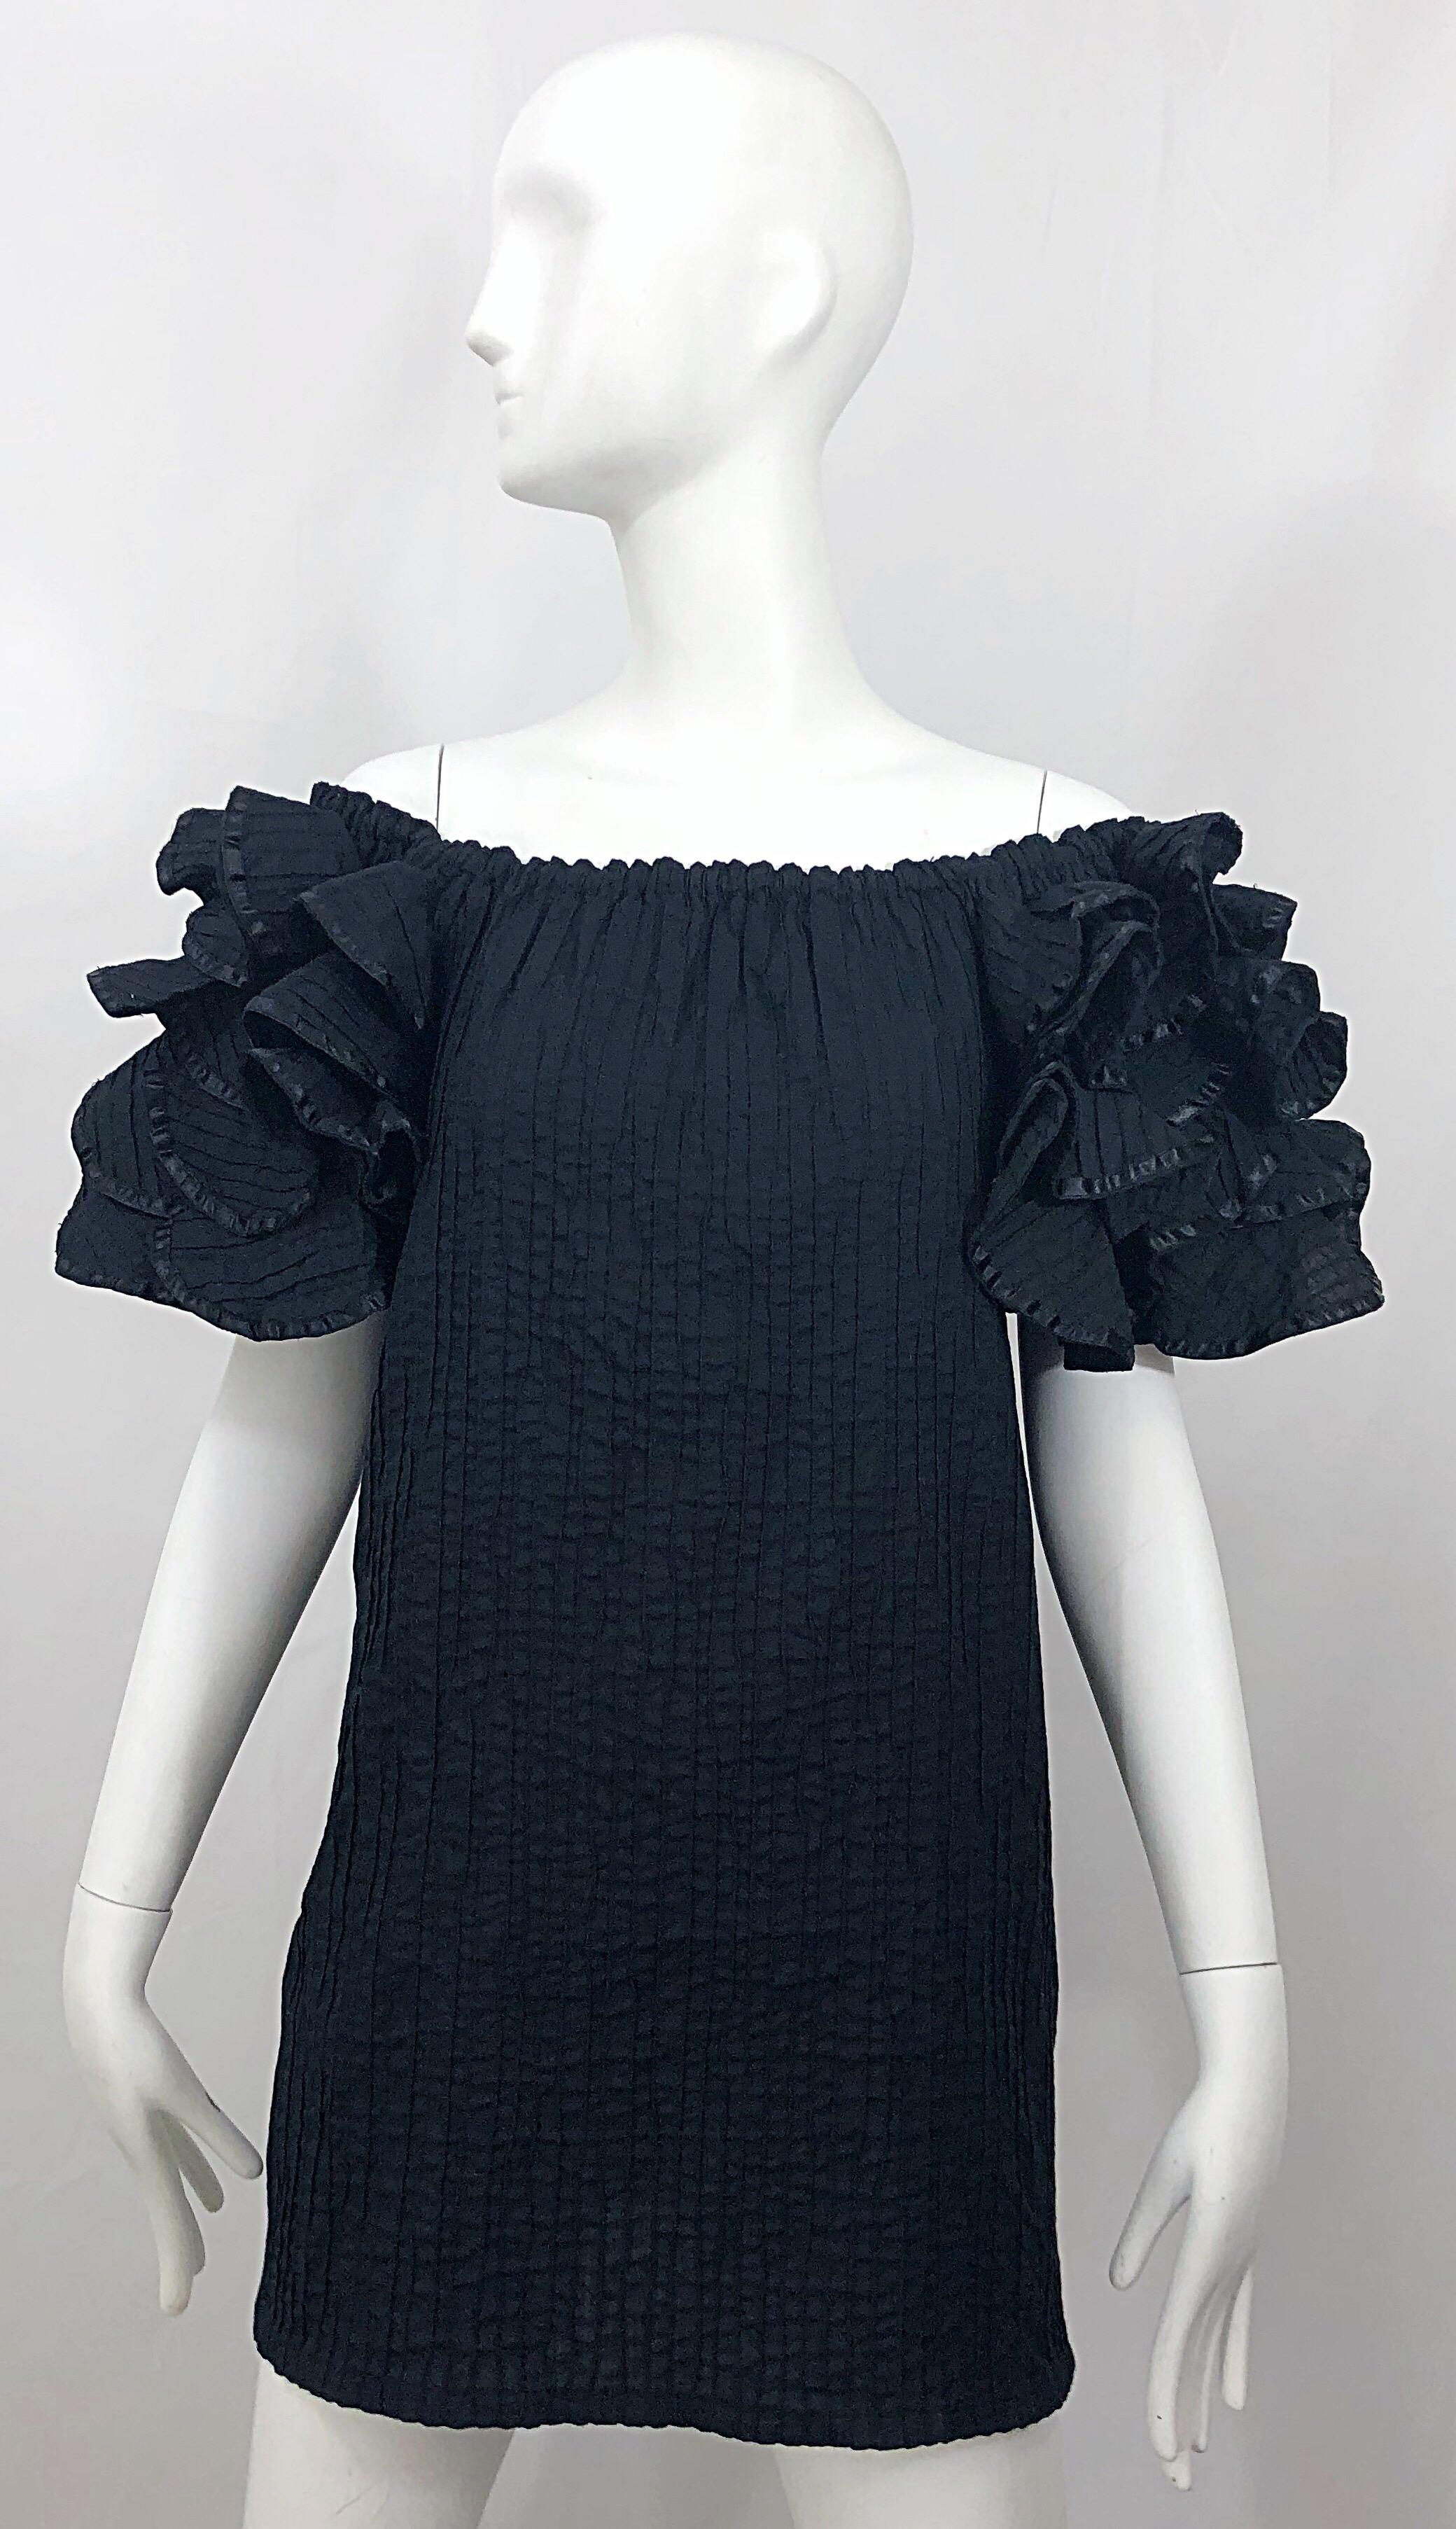 Rare vintage 60s TACHI CASTIO for Pan American black cotton Flamenco style cotton off-the-shoulder shift tunic / mini dress! Features chic Space Age style ruffled sleeves. Buttons up the back. Great belted or alone. Can be worn either as a tunic top